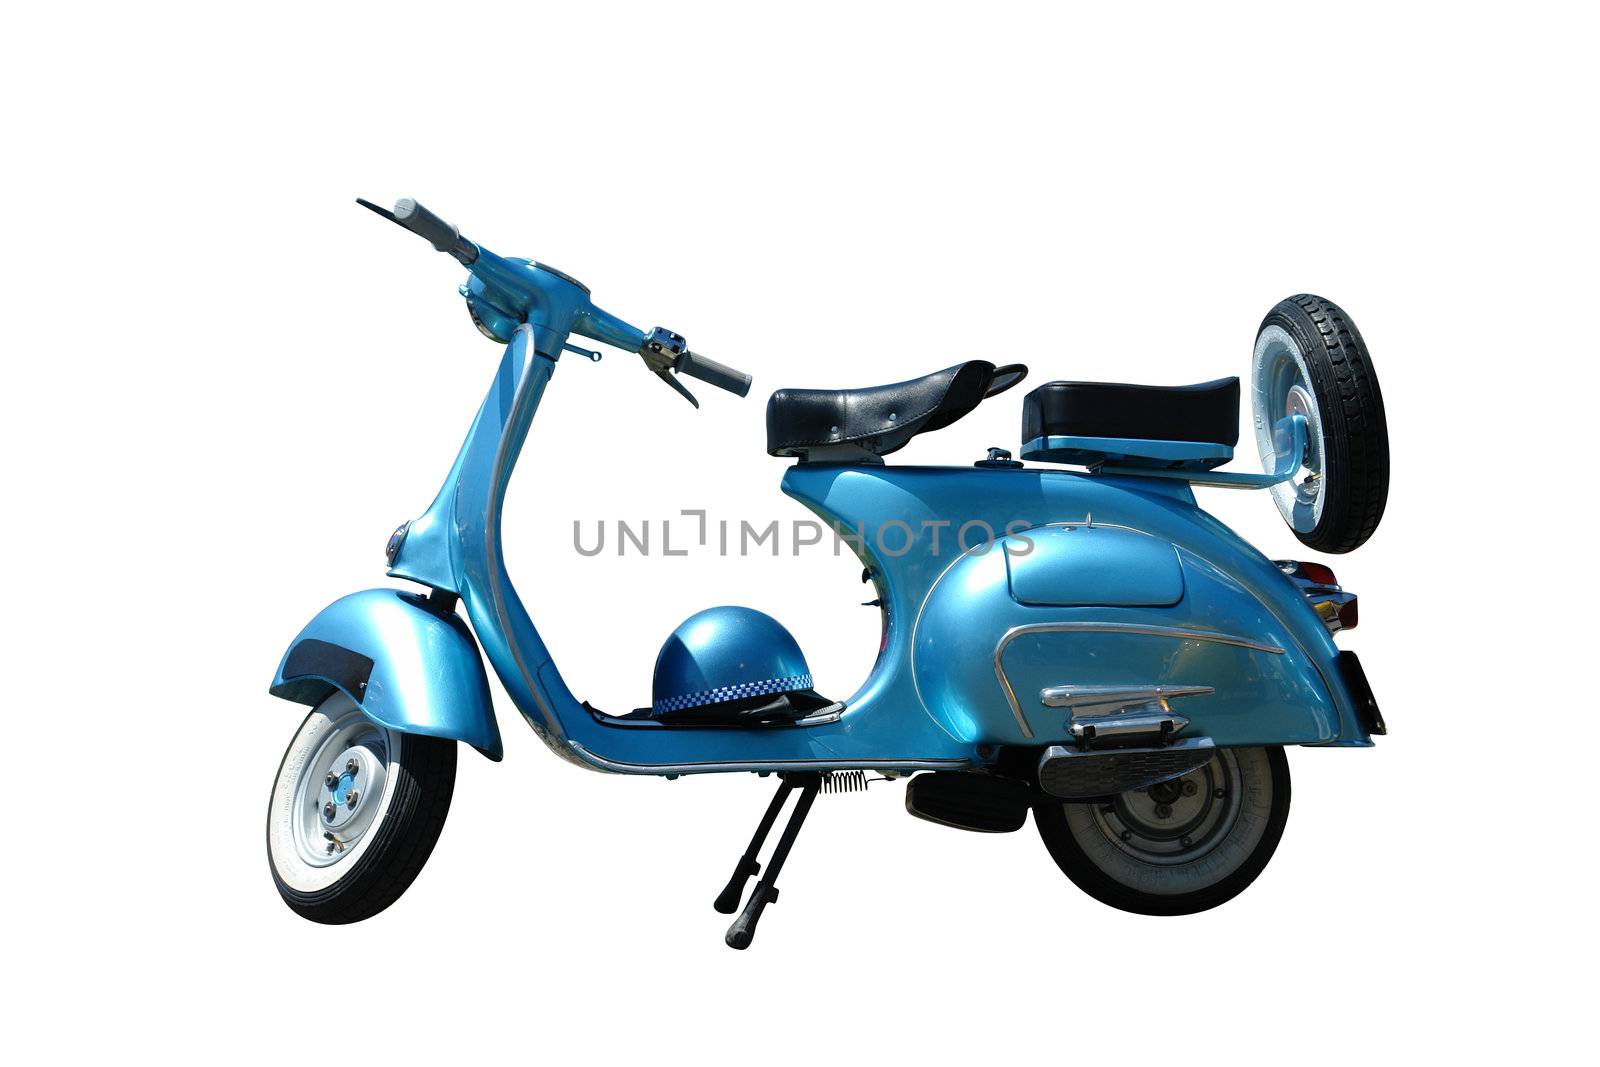 Vintage vespa scooter (path included) by simas2